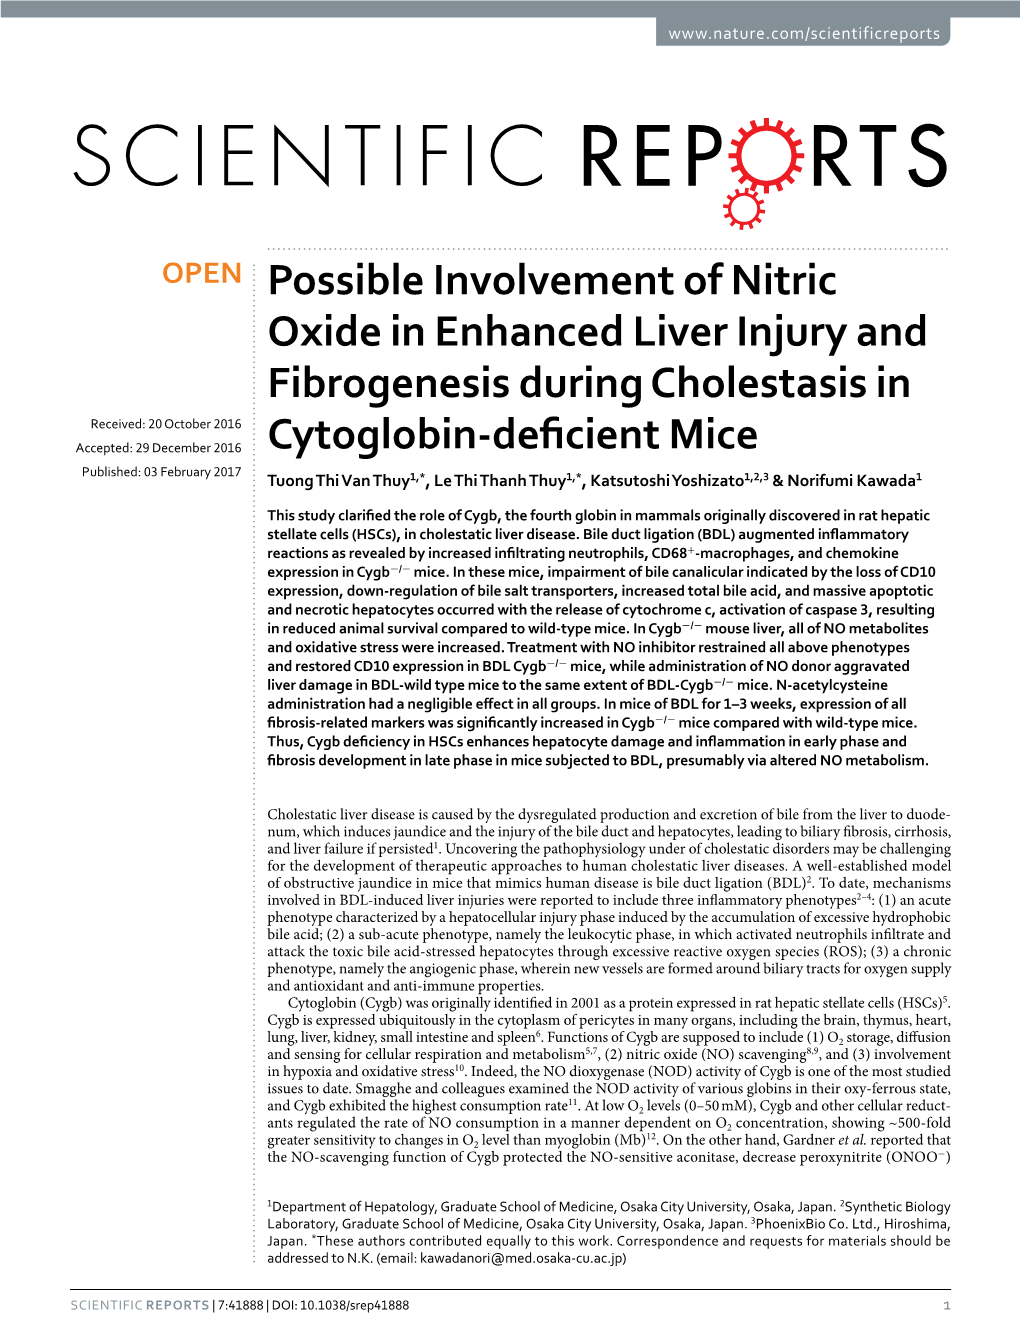 Possible Involvement of Nitric Oxide in Enhanced Liver Injury And